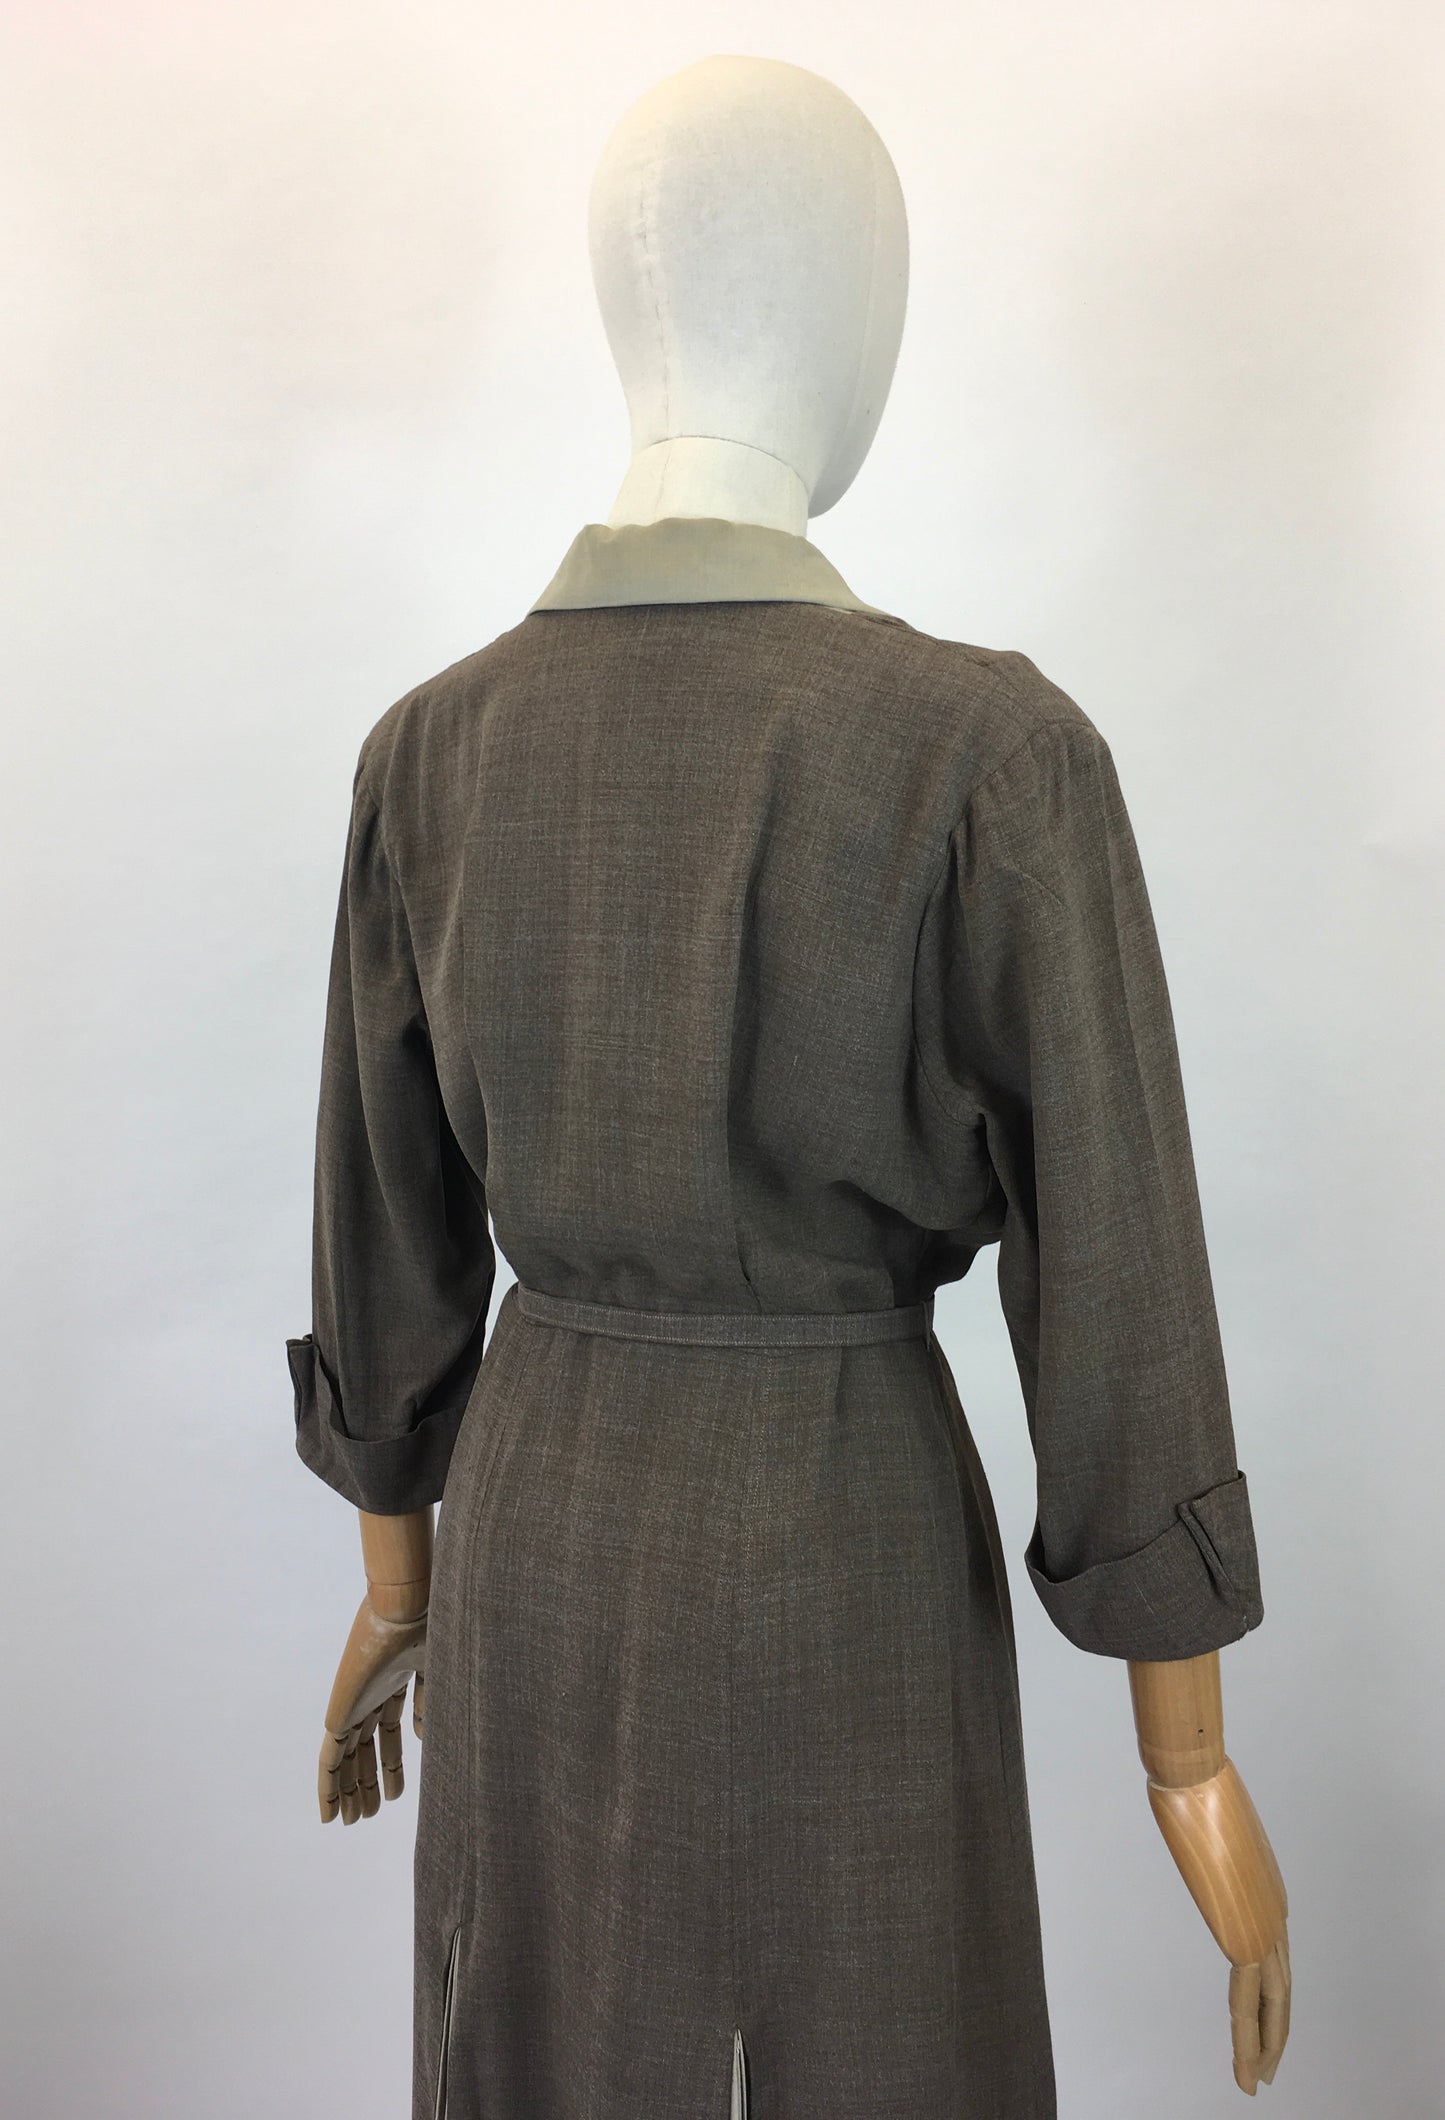 Original 40’s Beautiful Two Tone dress - Taupe and Brown colourway.